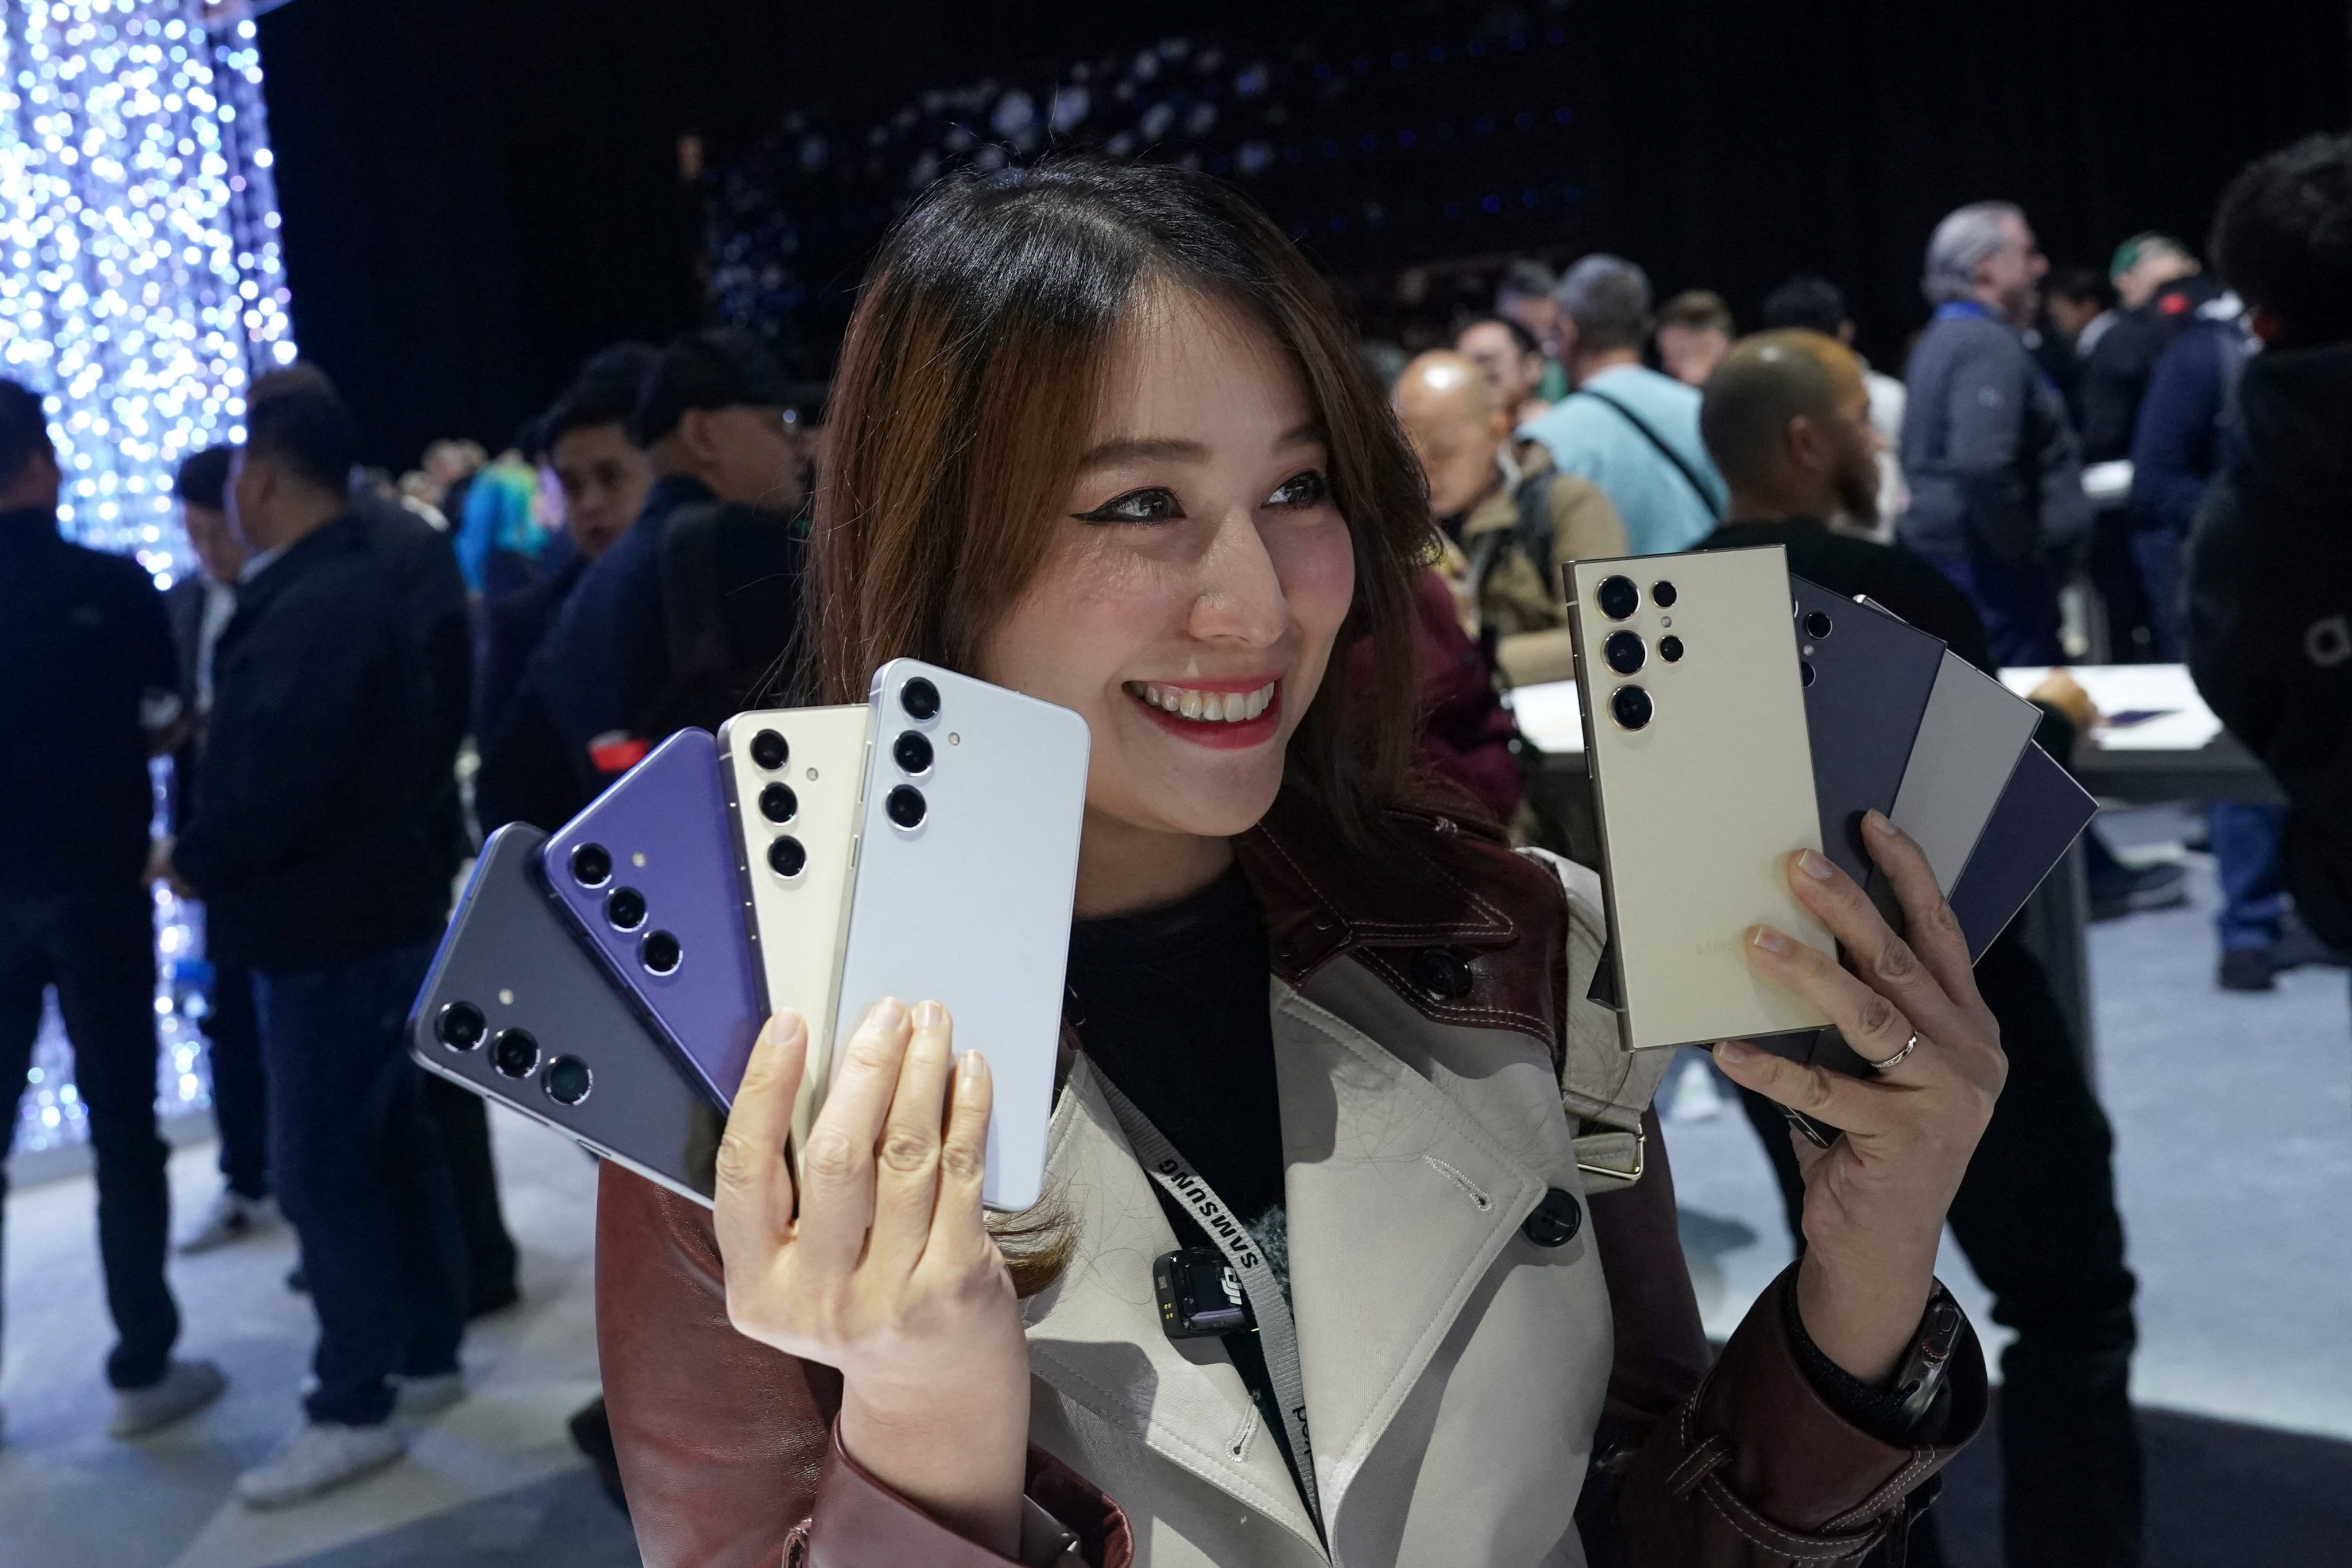 An influencer poses with Samsung’s new phones at the Galaxy Unpacked event in San Jose, California. Photo: Reuters